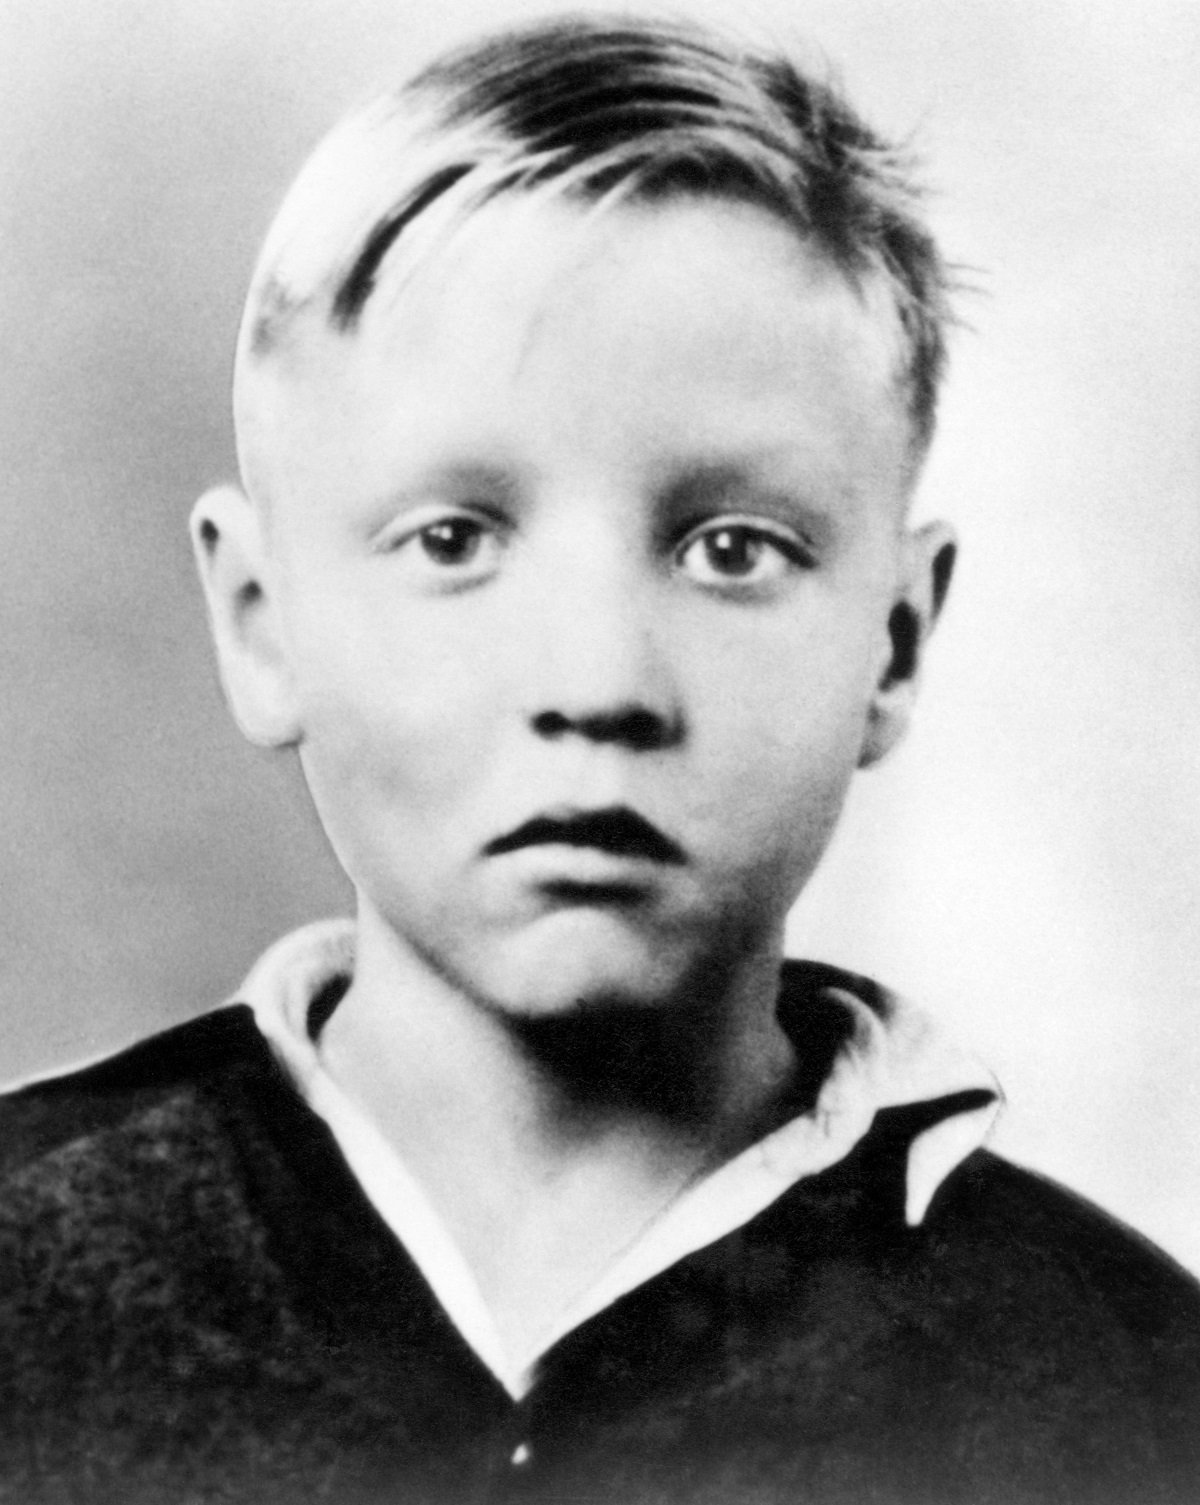 A headshot of a blonde Elvis Presley as a child in the early 1940s